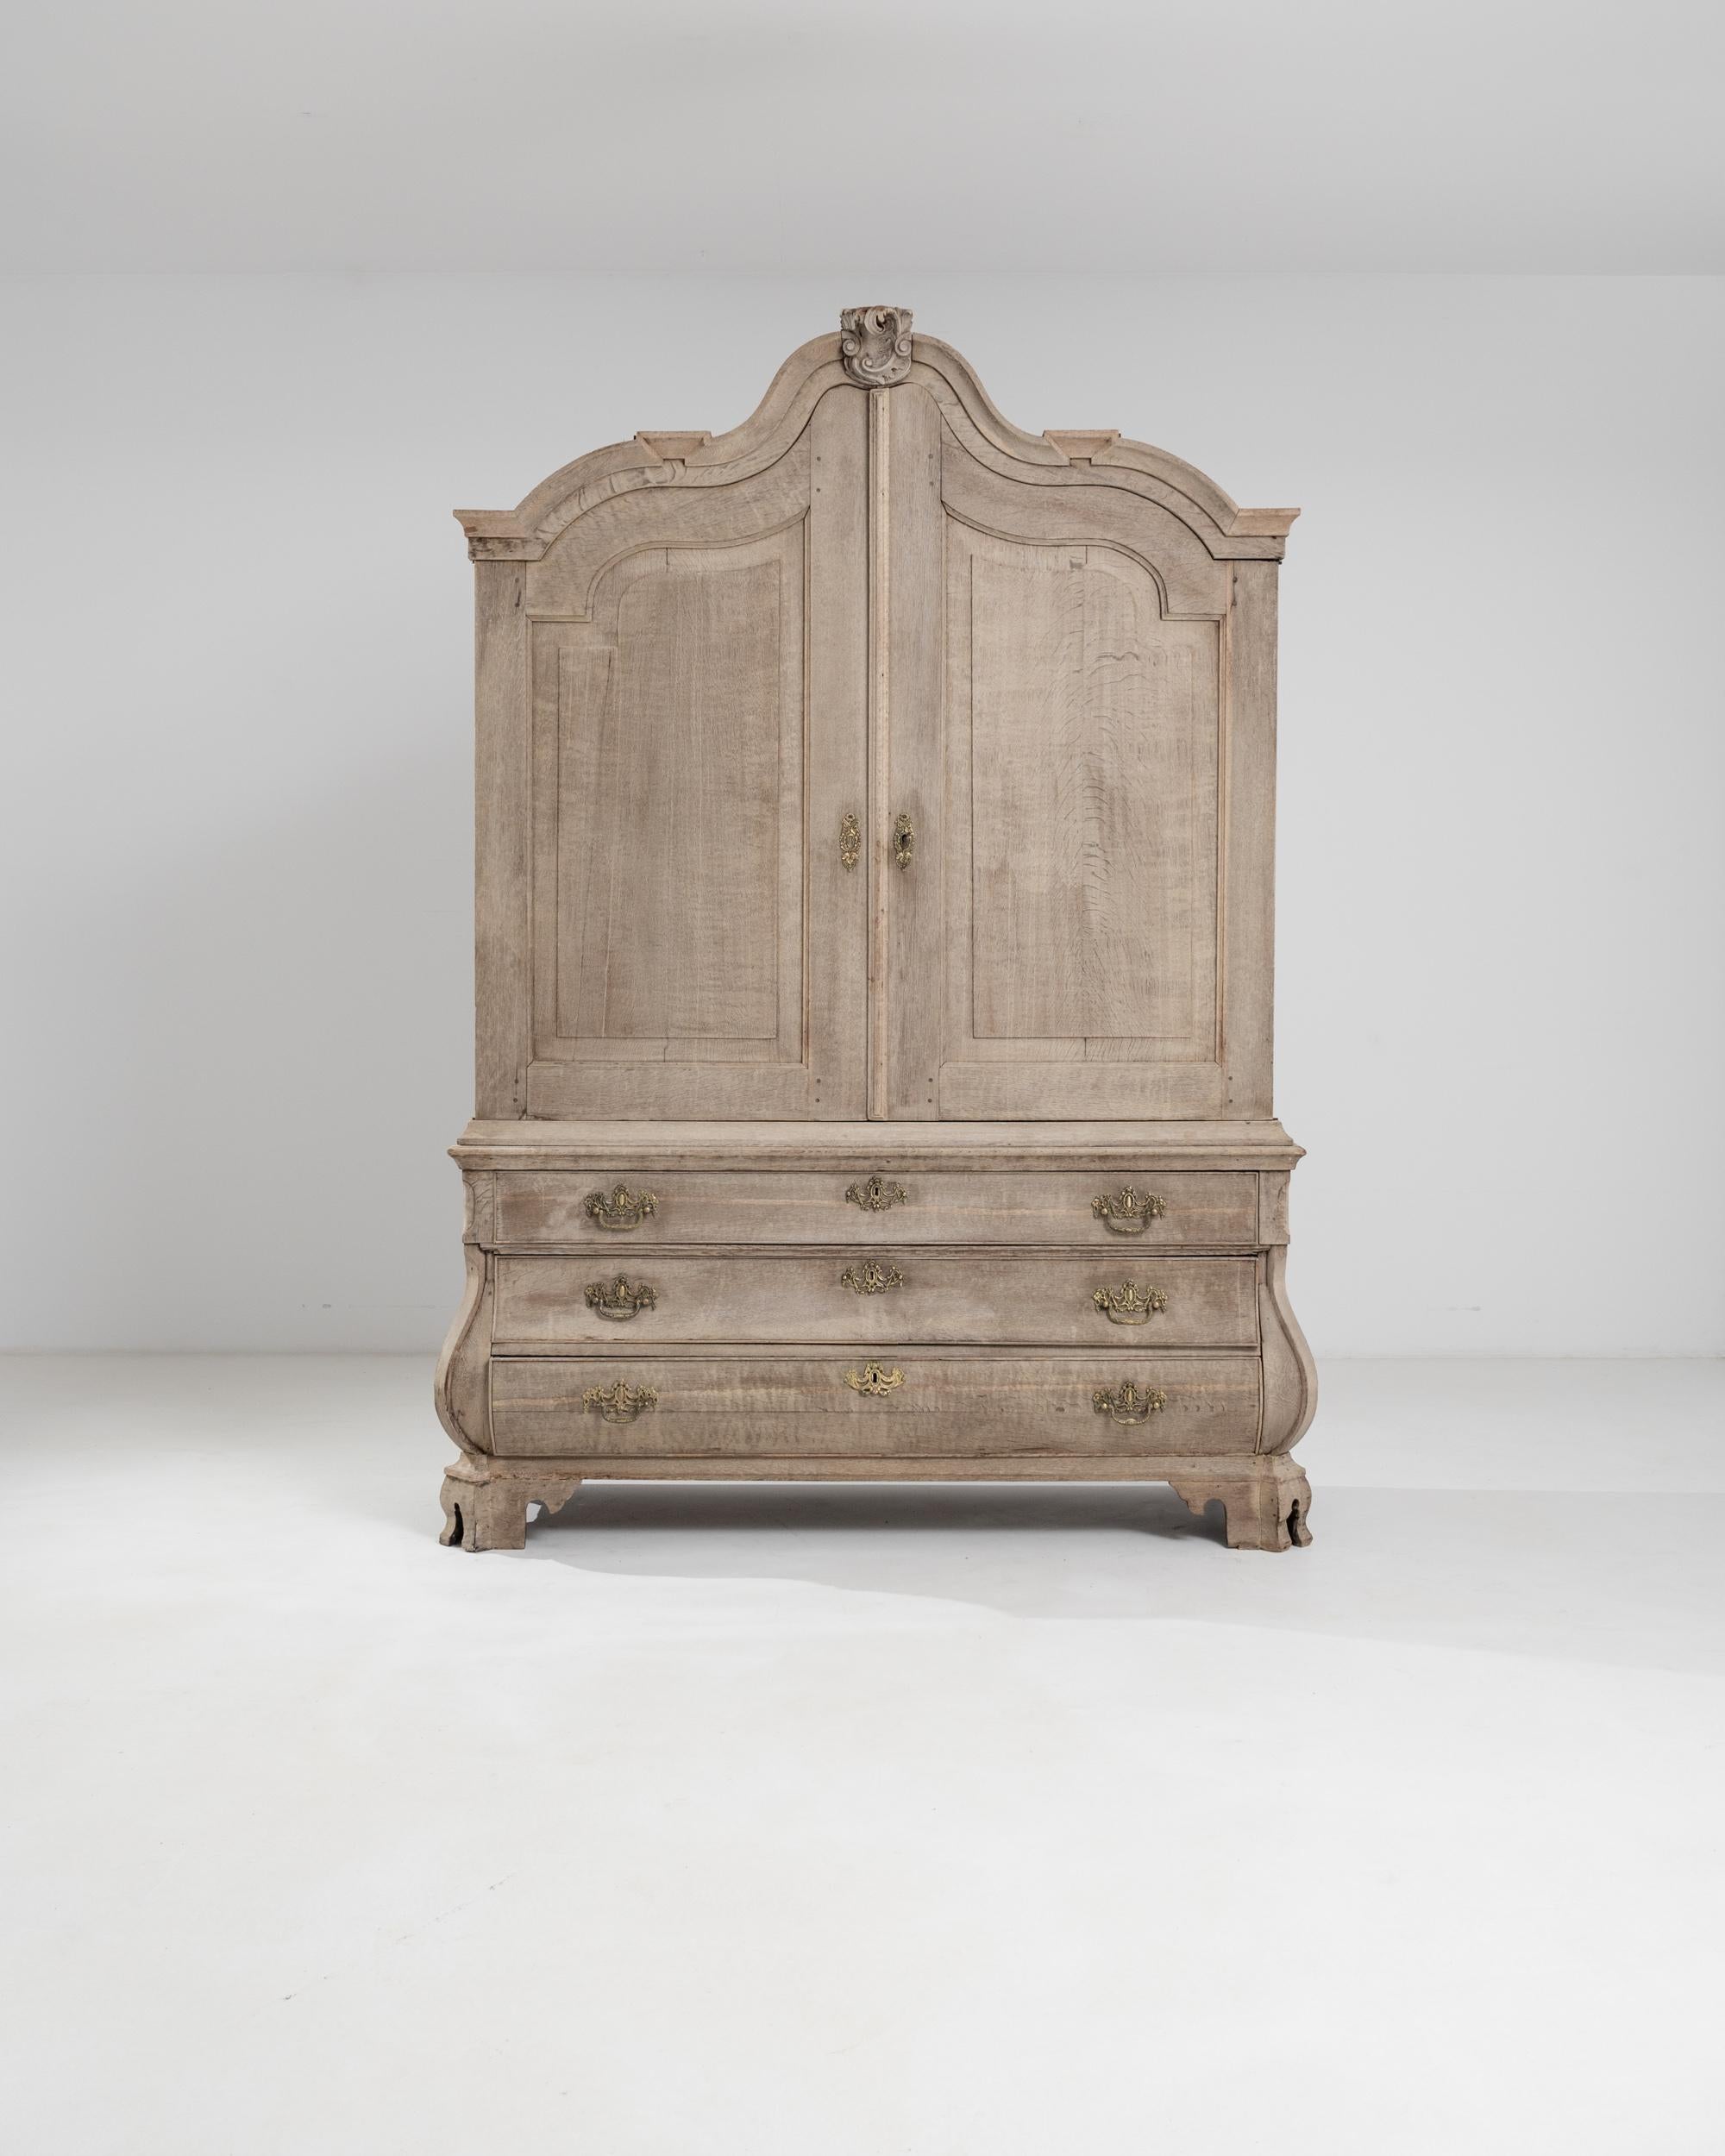 An 18th cabinet made in the Netherlands, this statuesque piece flaunts an elegant baroque silhouette. Standing on molded ogee bracket feet, the bombe chest is provided with three large drawers and a sculpted cornice top with a verdant central molded